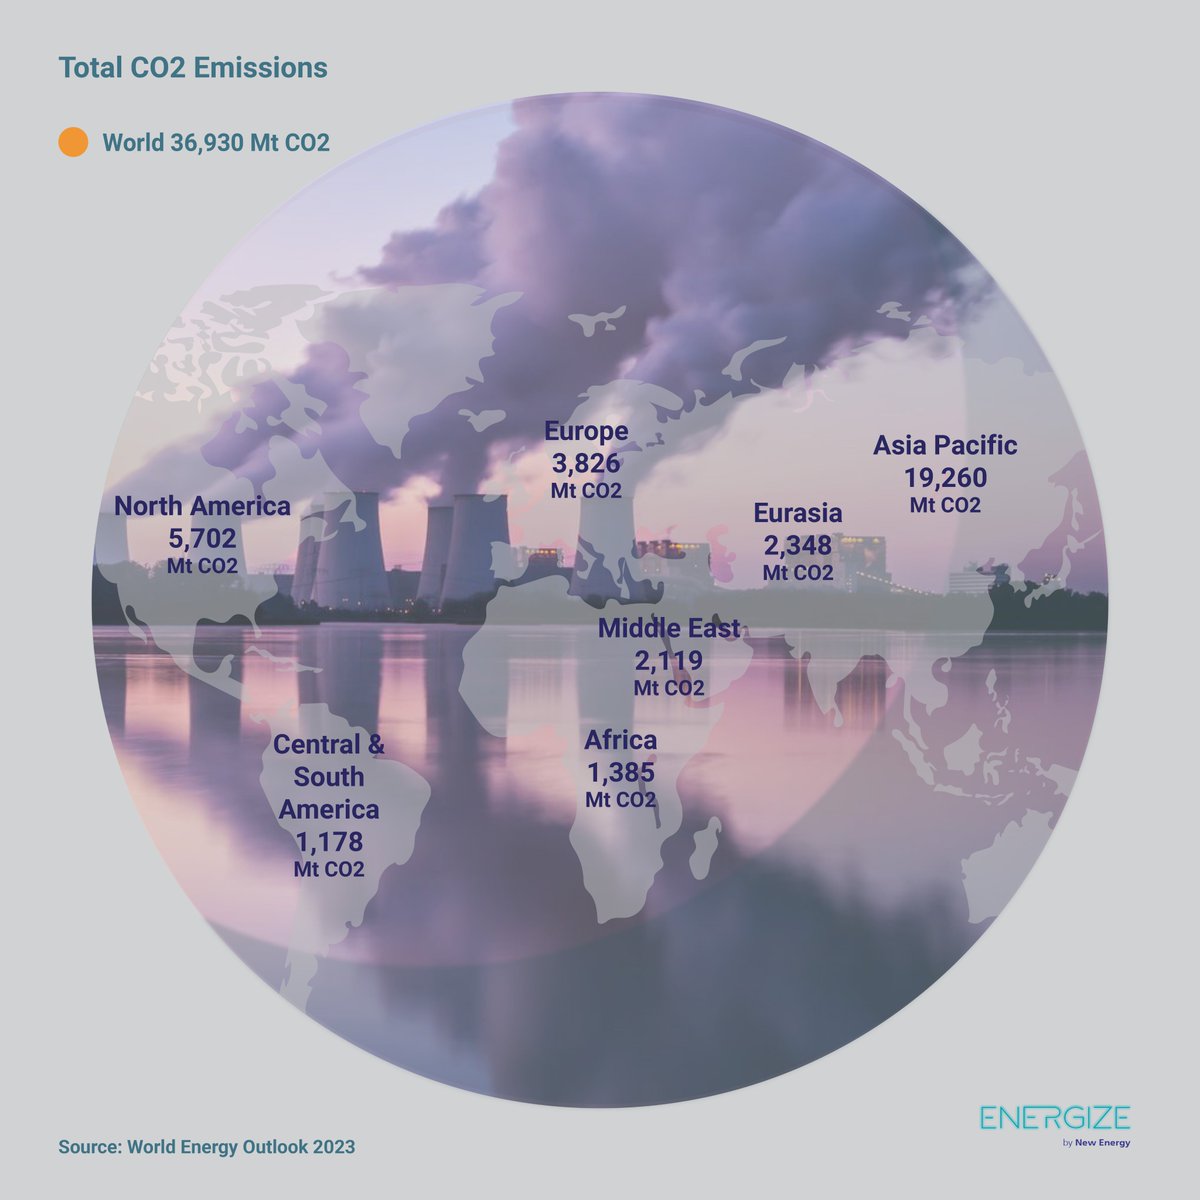 The Middle east accounts for almost 6% of Global CO2 emissions in 2022 with 2,119 Mt CO2 while Central and South America and Asia Pacific constitute the lowest and highest CO2 emissions. Take a look at CO2 emissions around the globe ⬇️
#Energize #MiddleEast #CO2emissions #energy